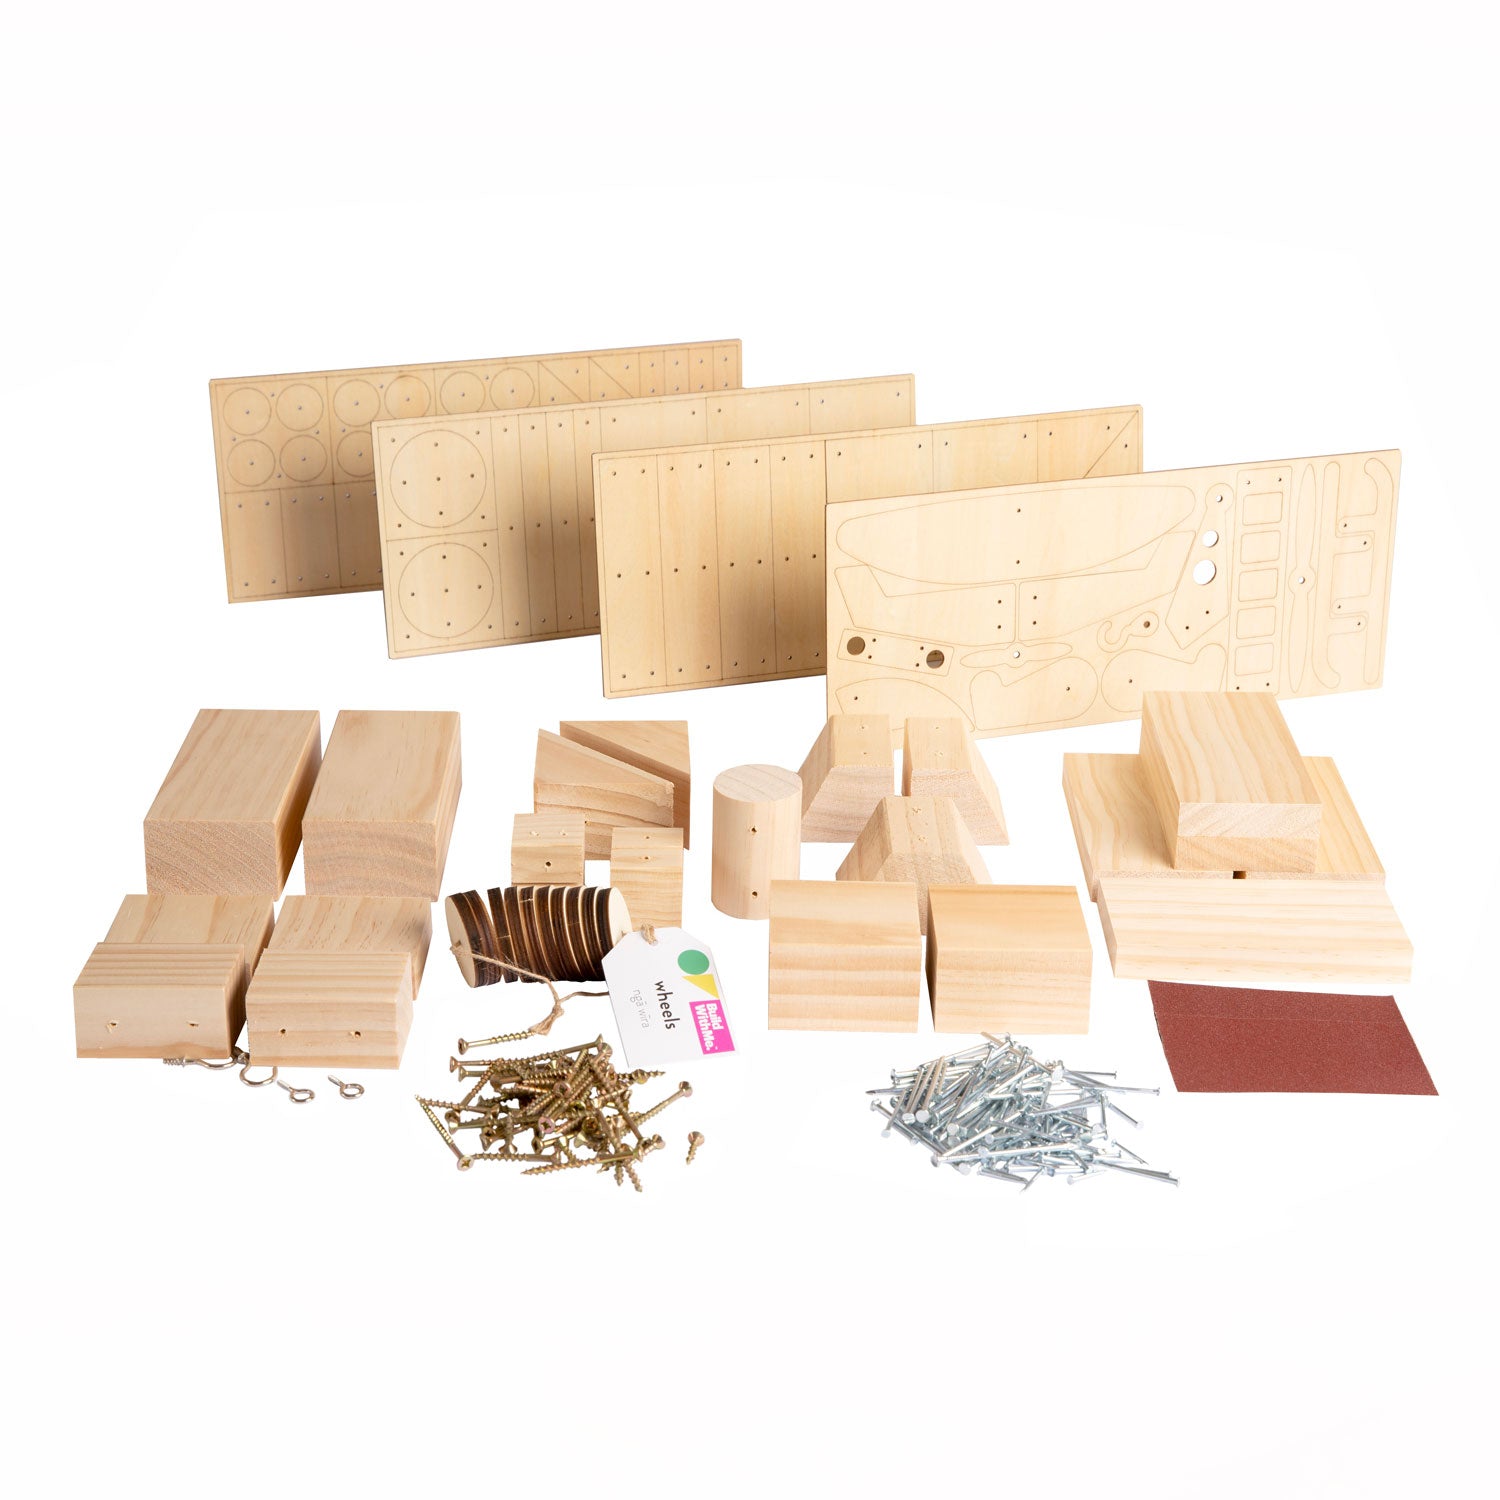 Build With Me: Your One Stop Childrens Woodwork Shop